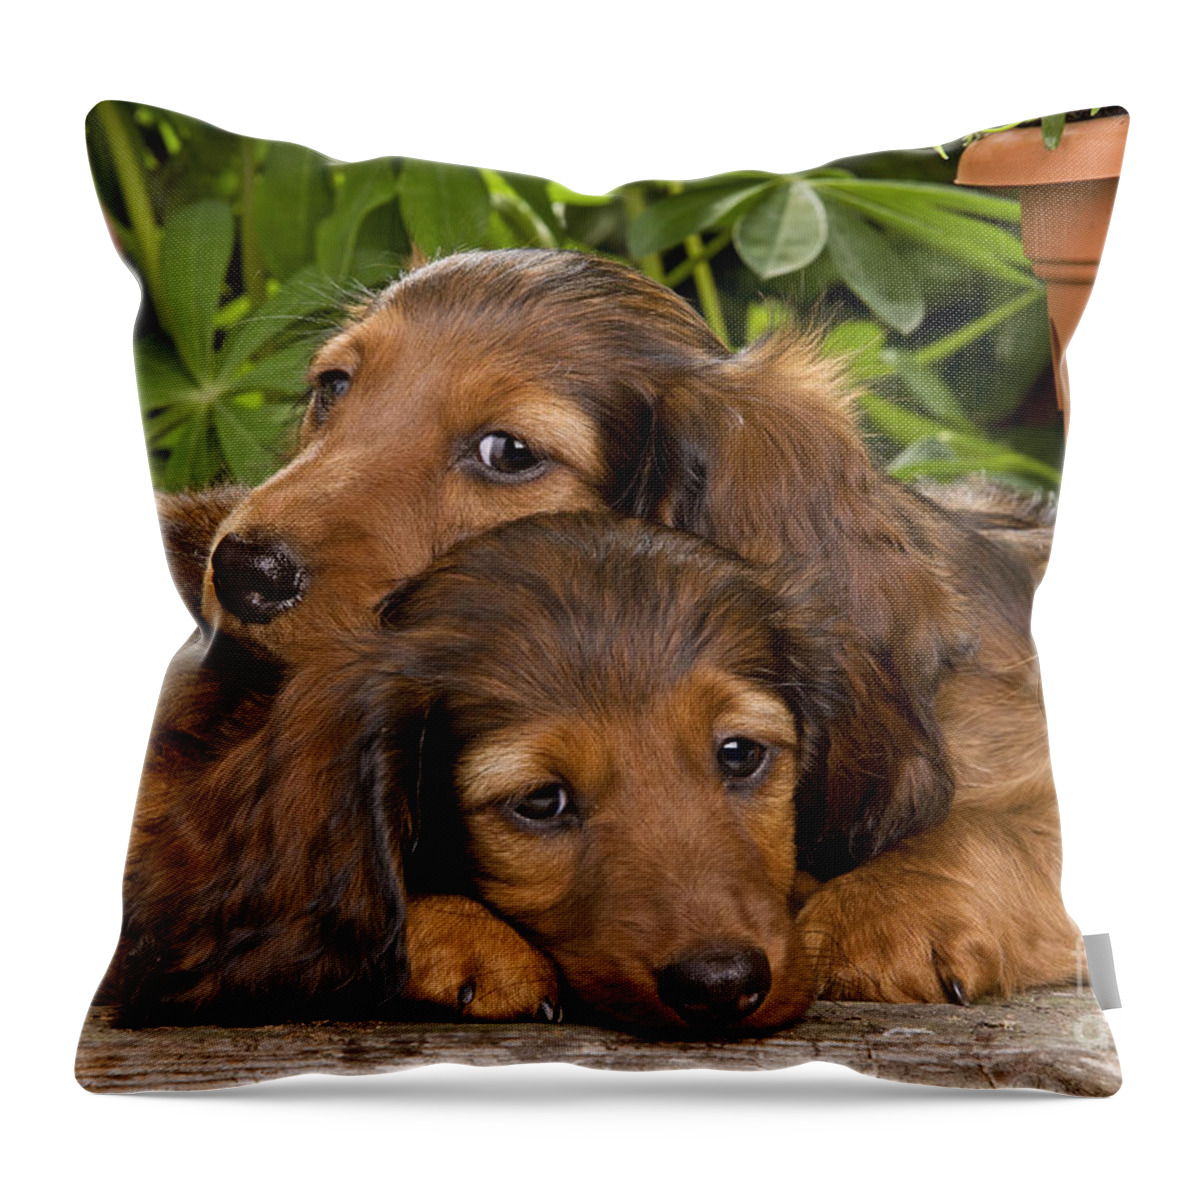 Dachshund Throw Pillow featuring the photograph Long-haired Dachshunds by Jean-Michel Labat